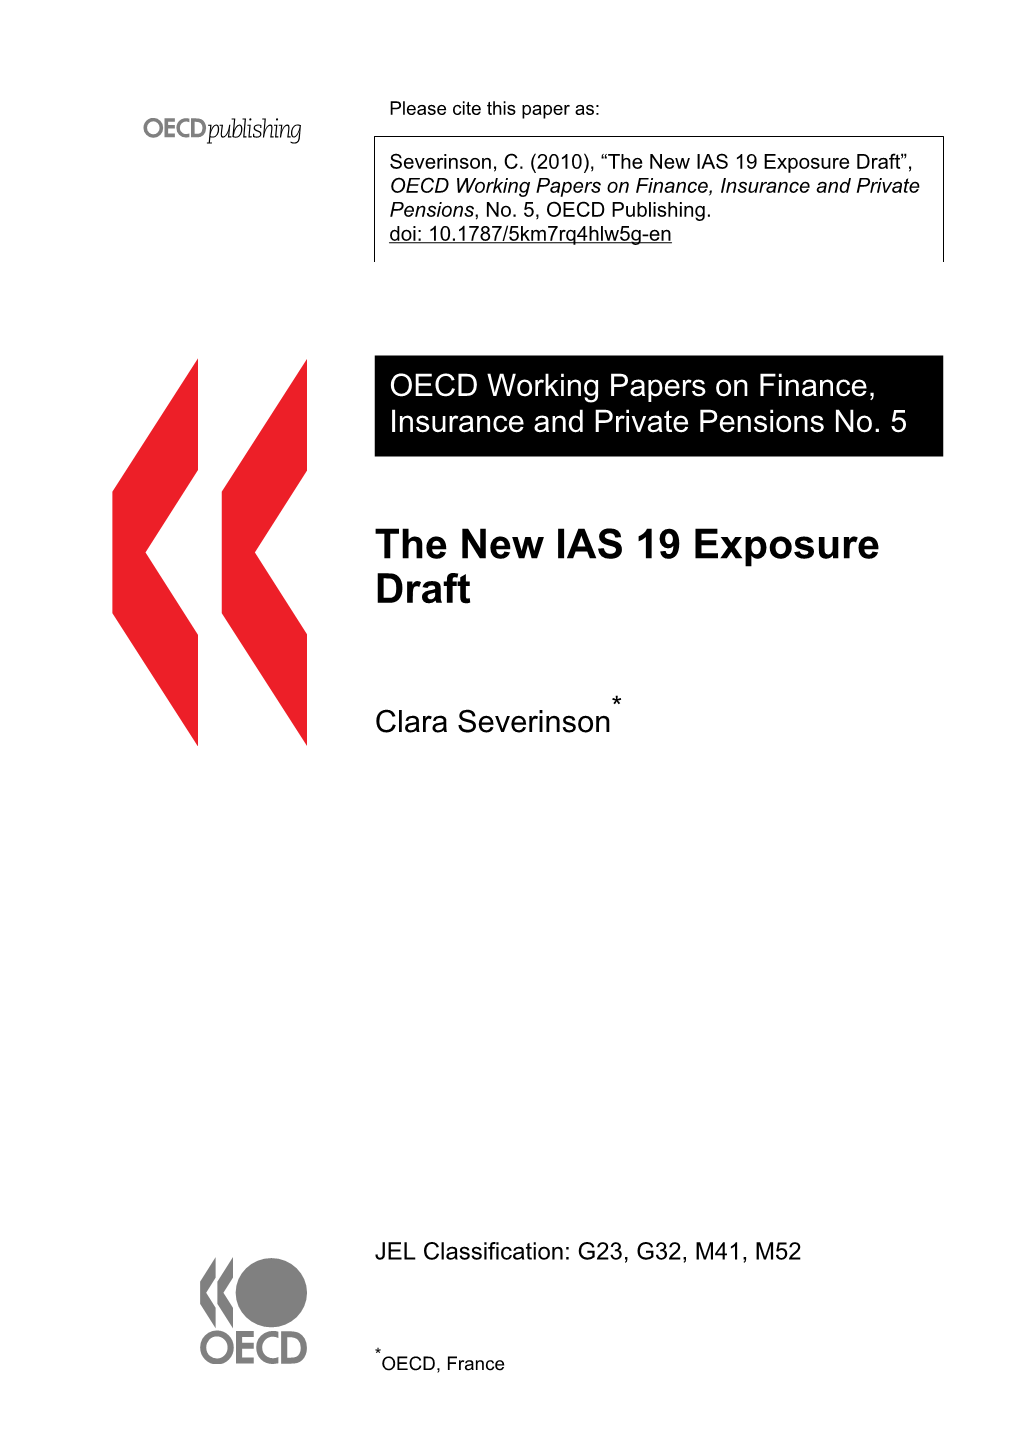 The New IAS 19 Exposure Draft”, OECD Working Papers on Finance, Insurance and Private Pensions, No